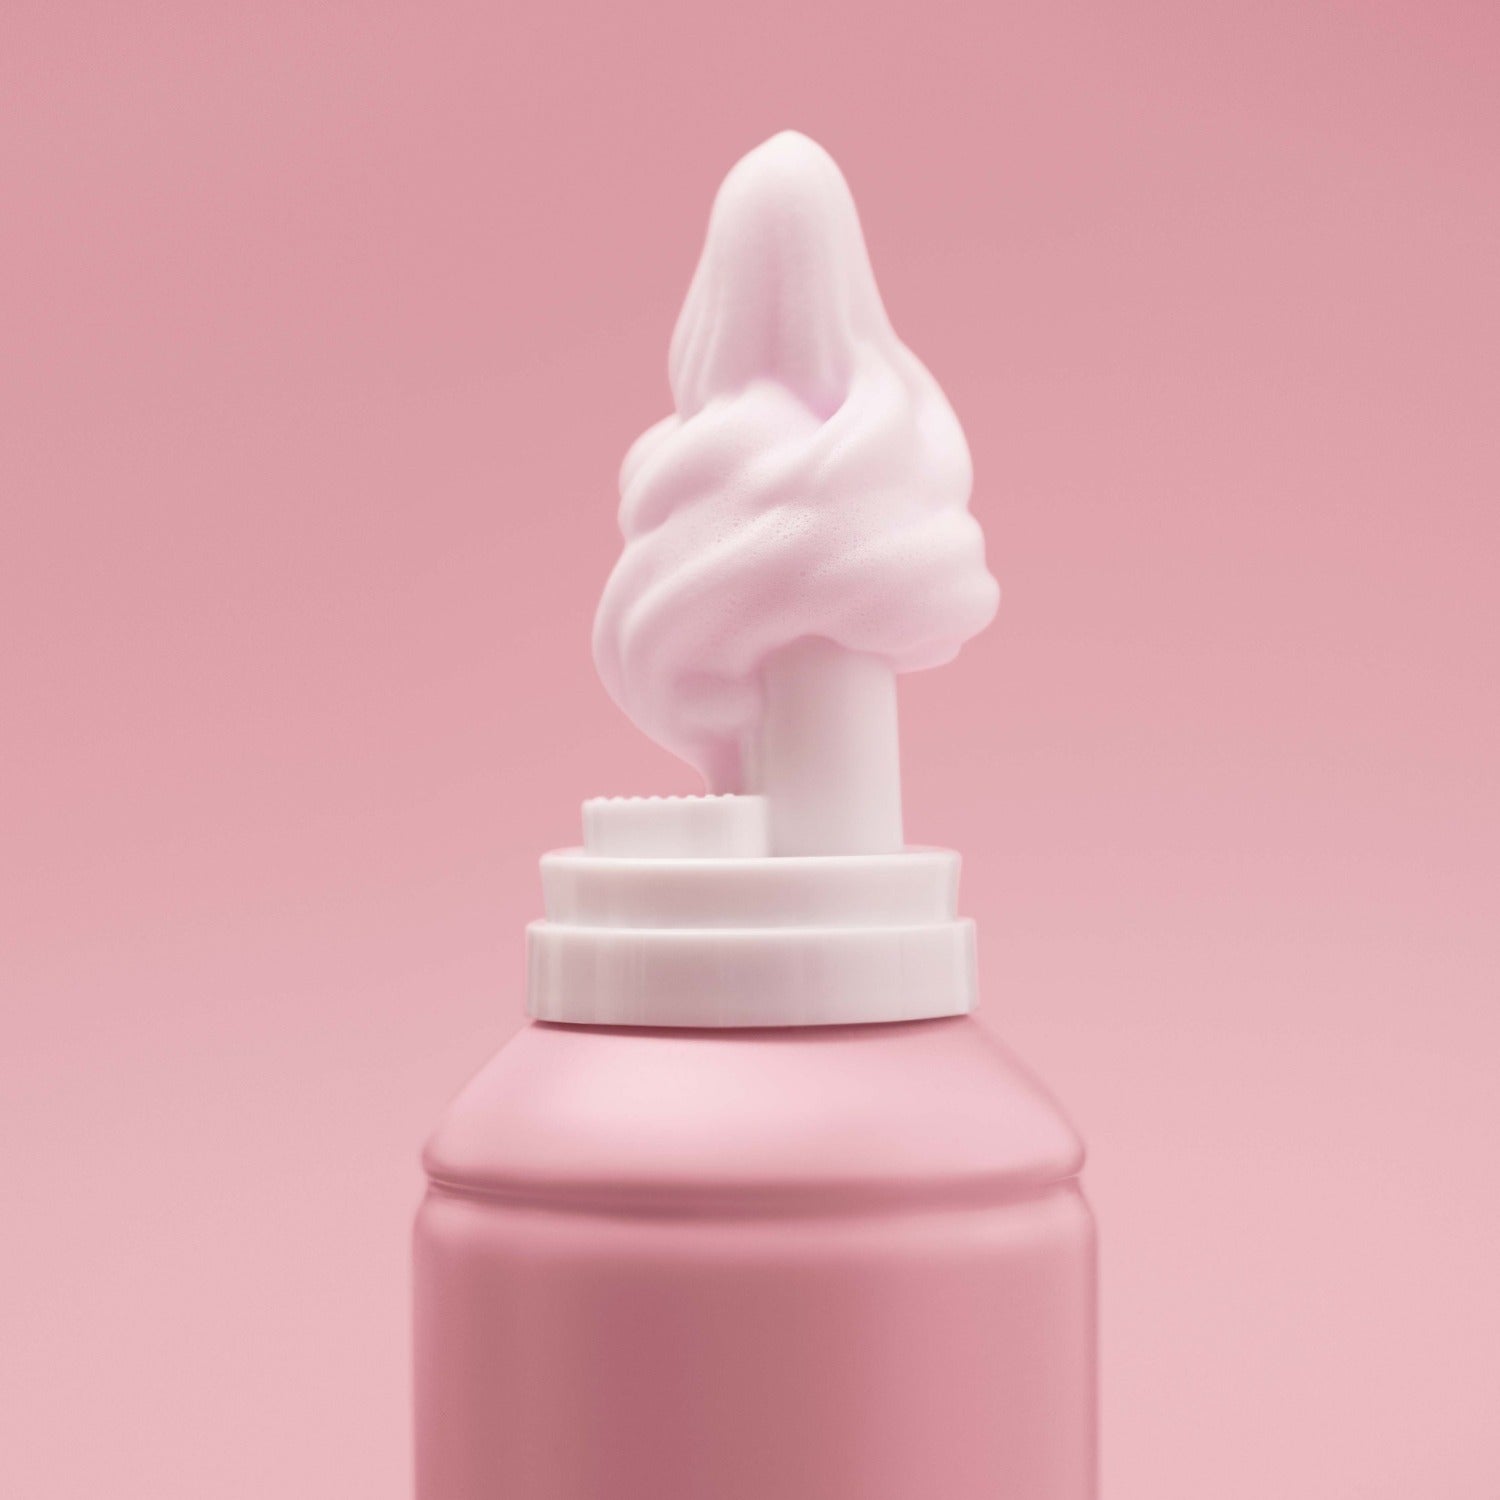 Close-up of foam coming off the nozzle of the cherry-scented Mecré moisturizing body wash bottle.